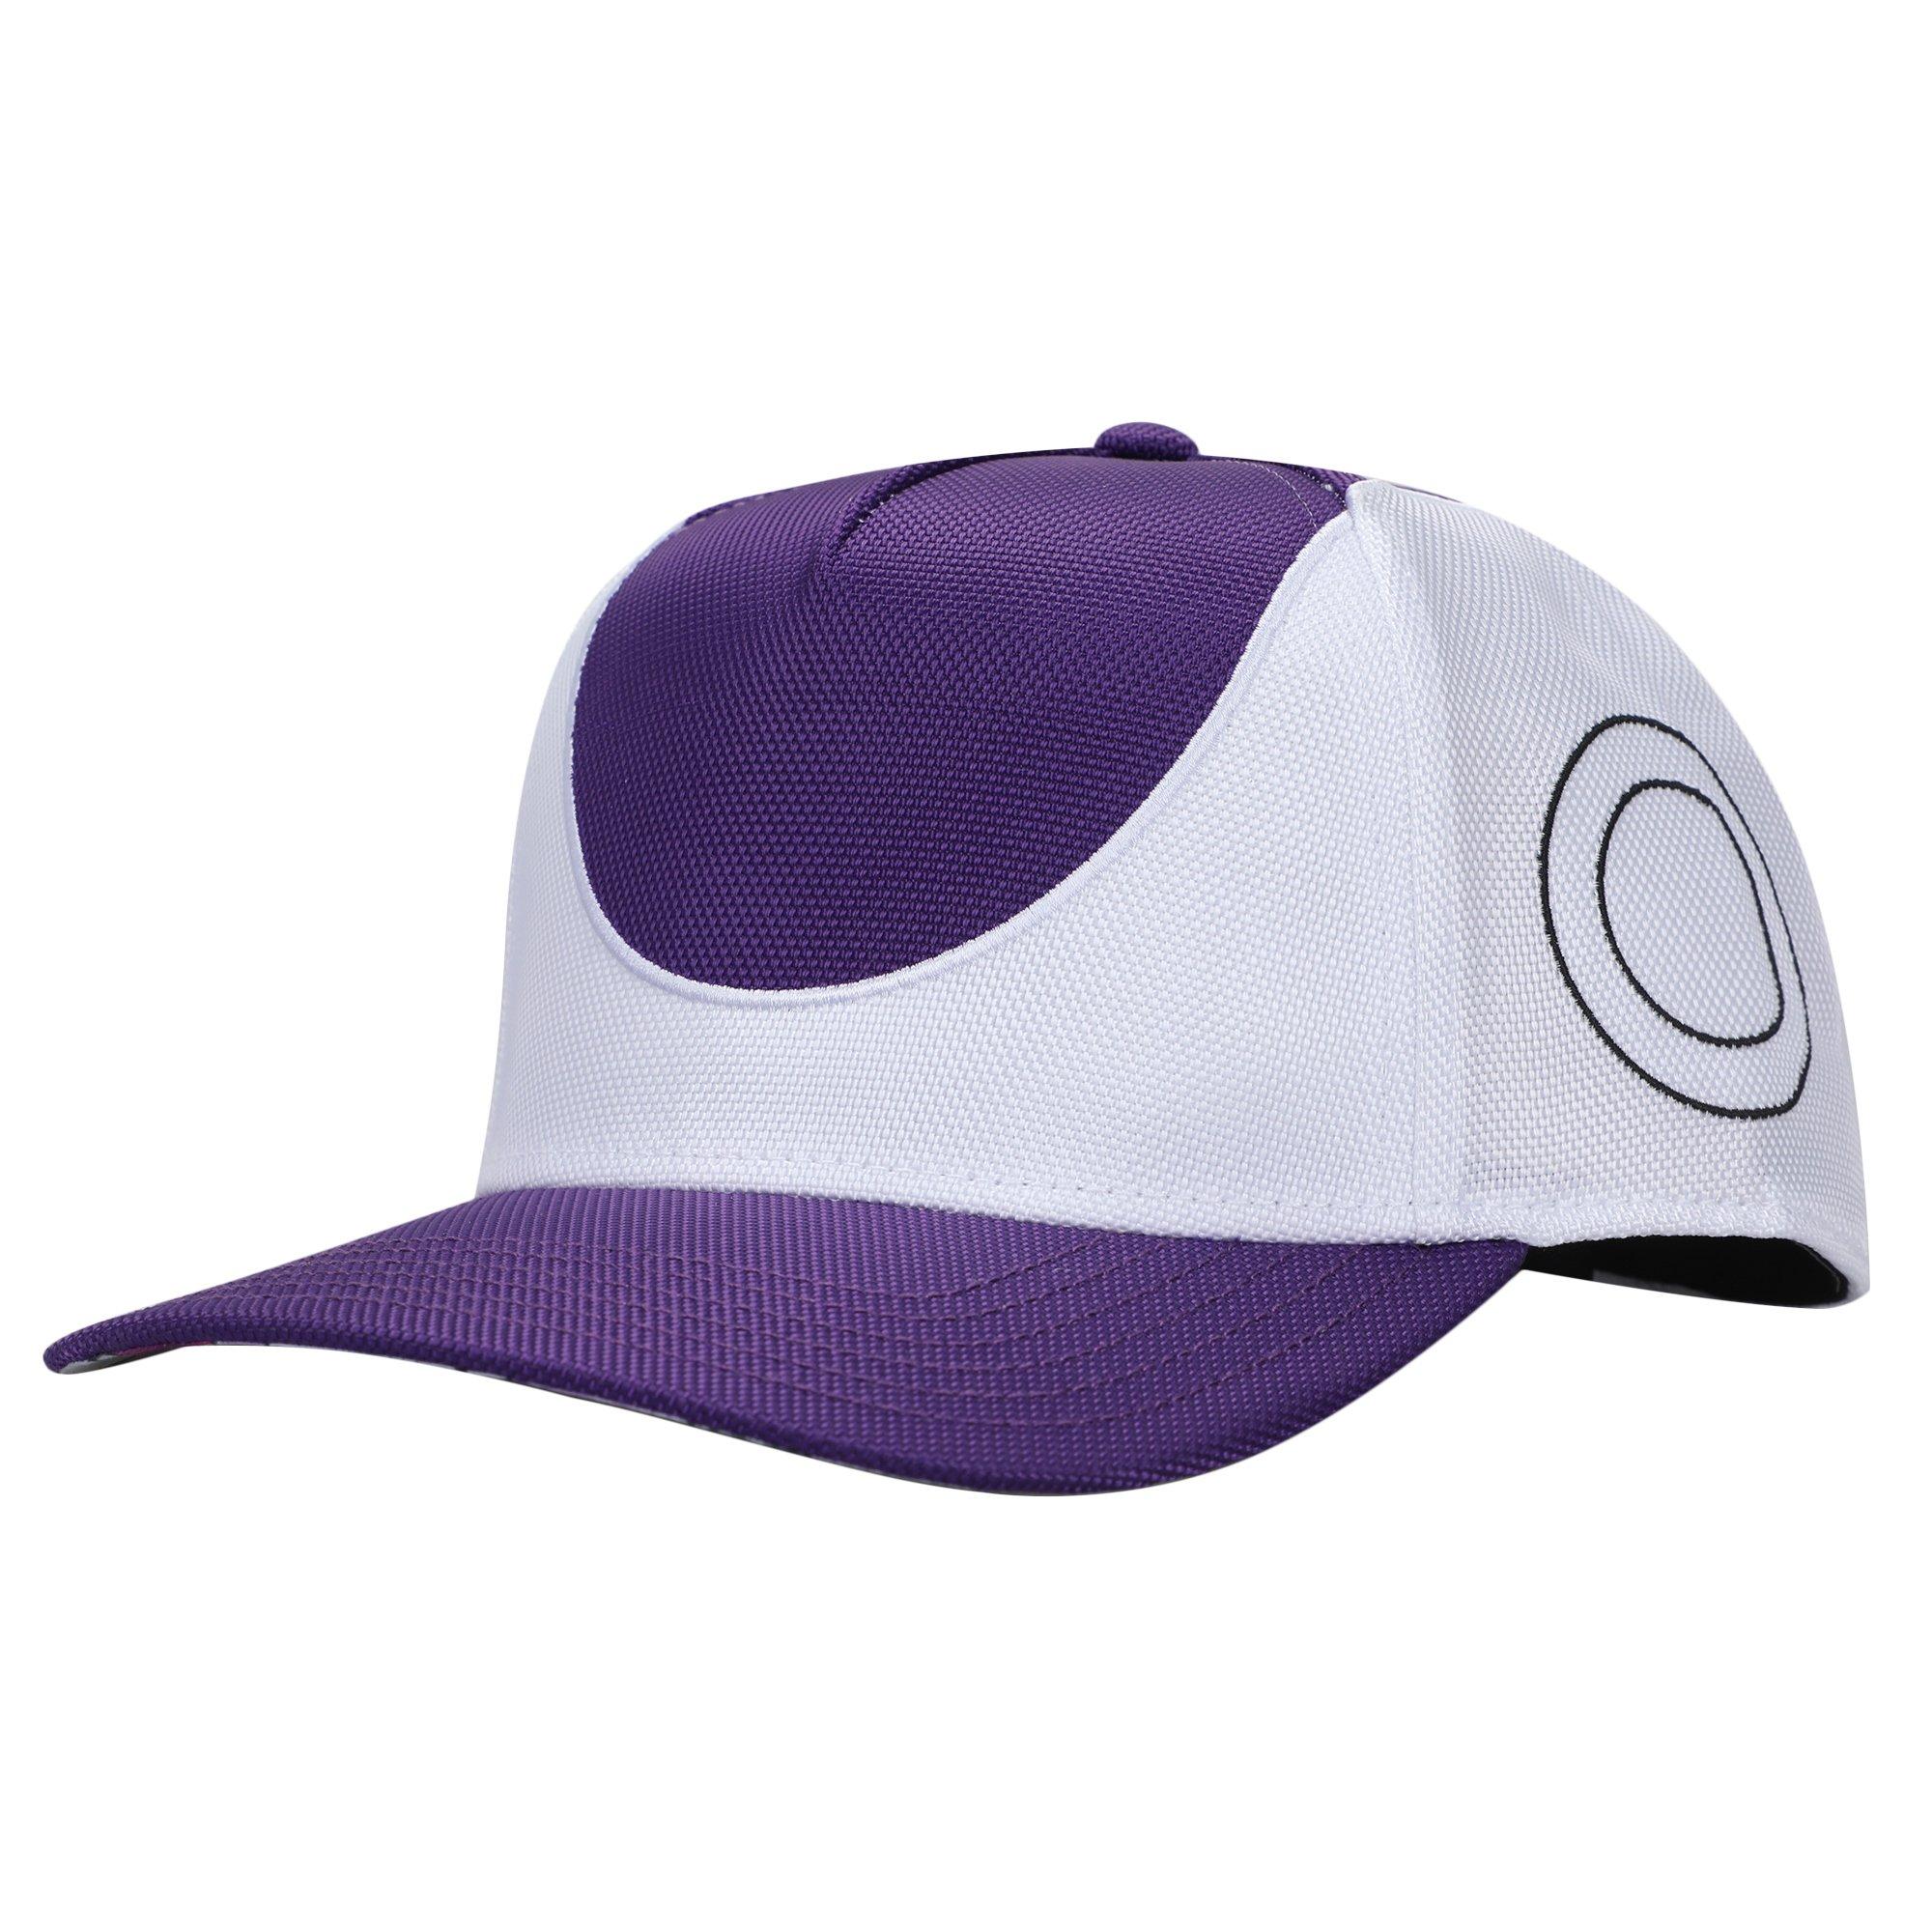 Dragon Ball Z Frieza Suit Up Men's Cosplay Pre-Curved Snapback Hat